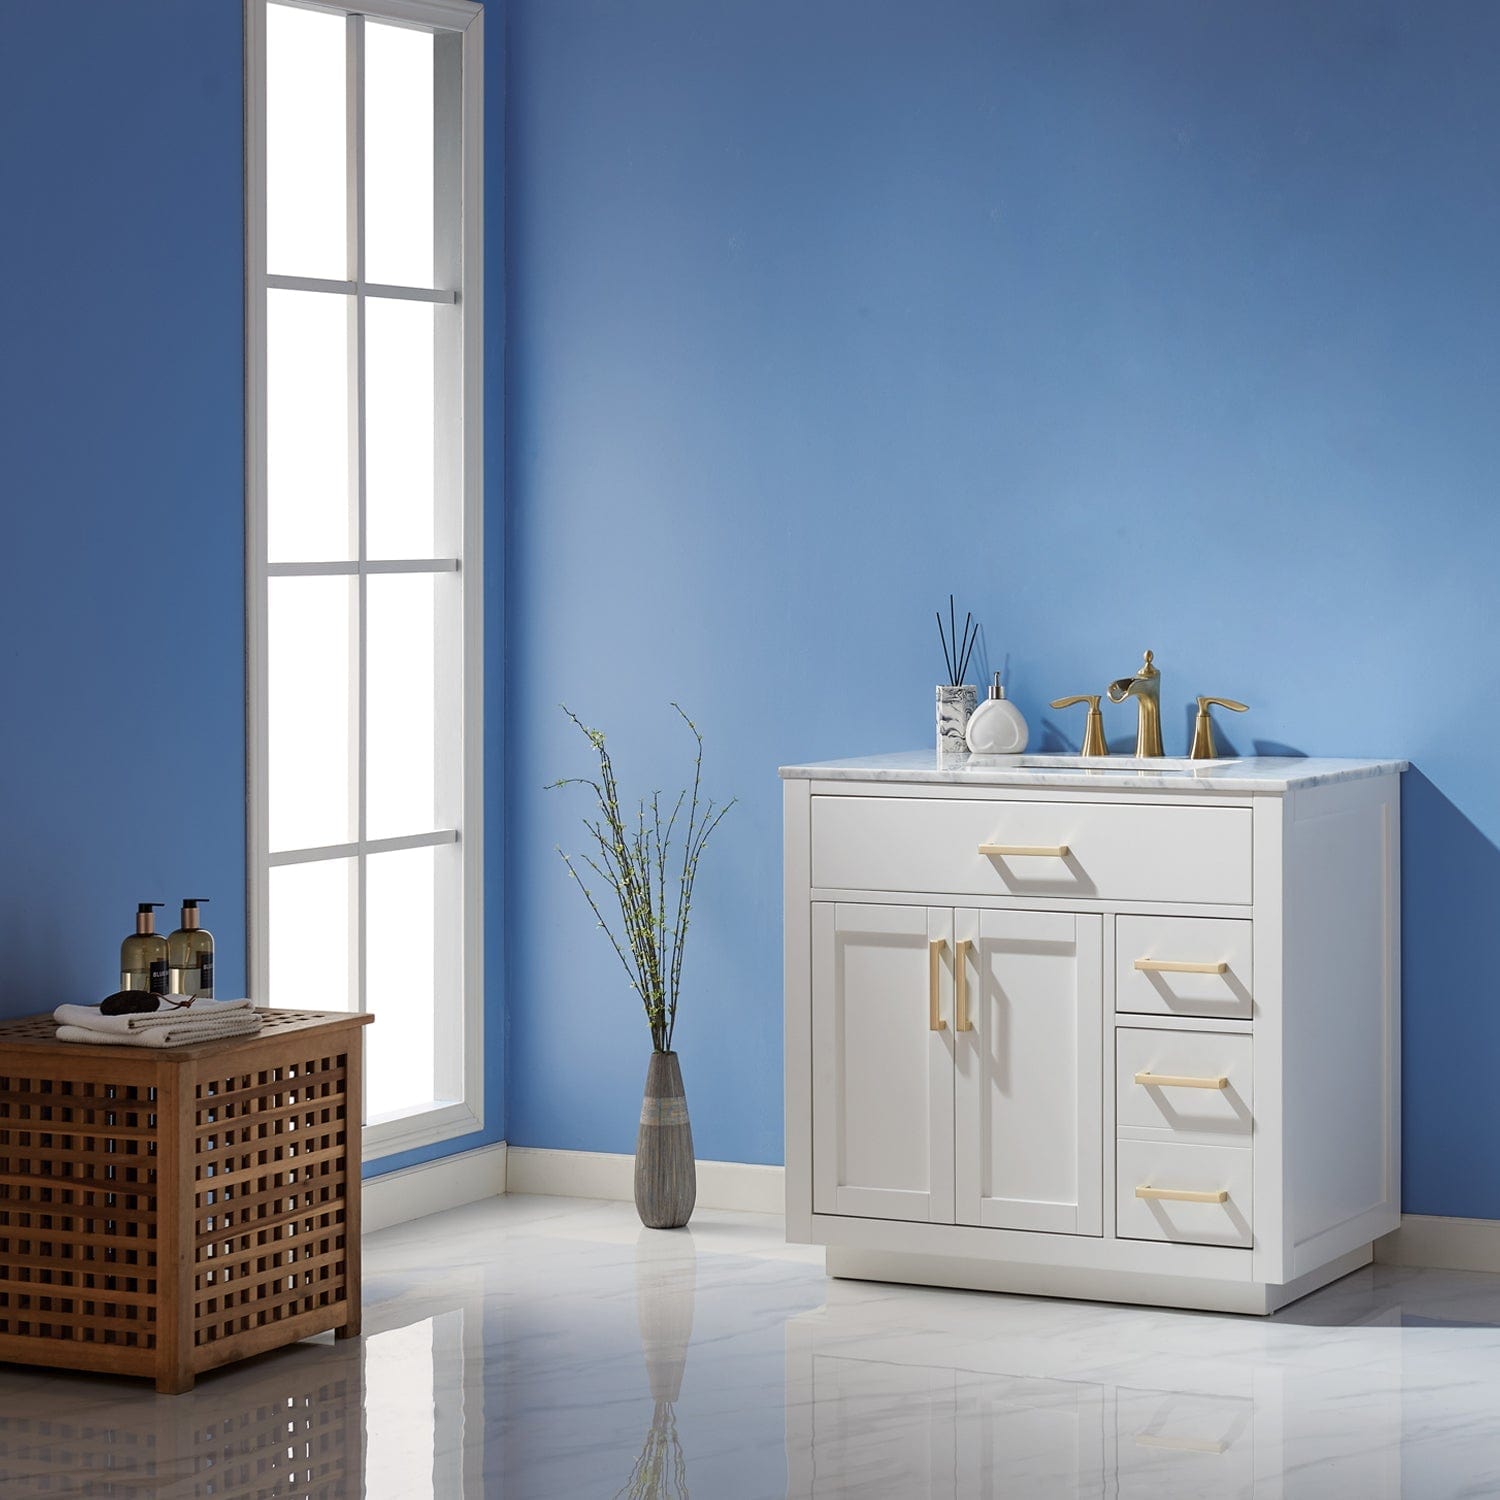 Altair Ivy 36" Single Bathroom Vanity Set in White and Carrara White Marble Countertop without Mirror 531036-WH-CA-NM - Molaix631112971140Vanity531036-WH-CA-NM